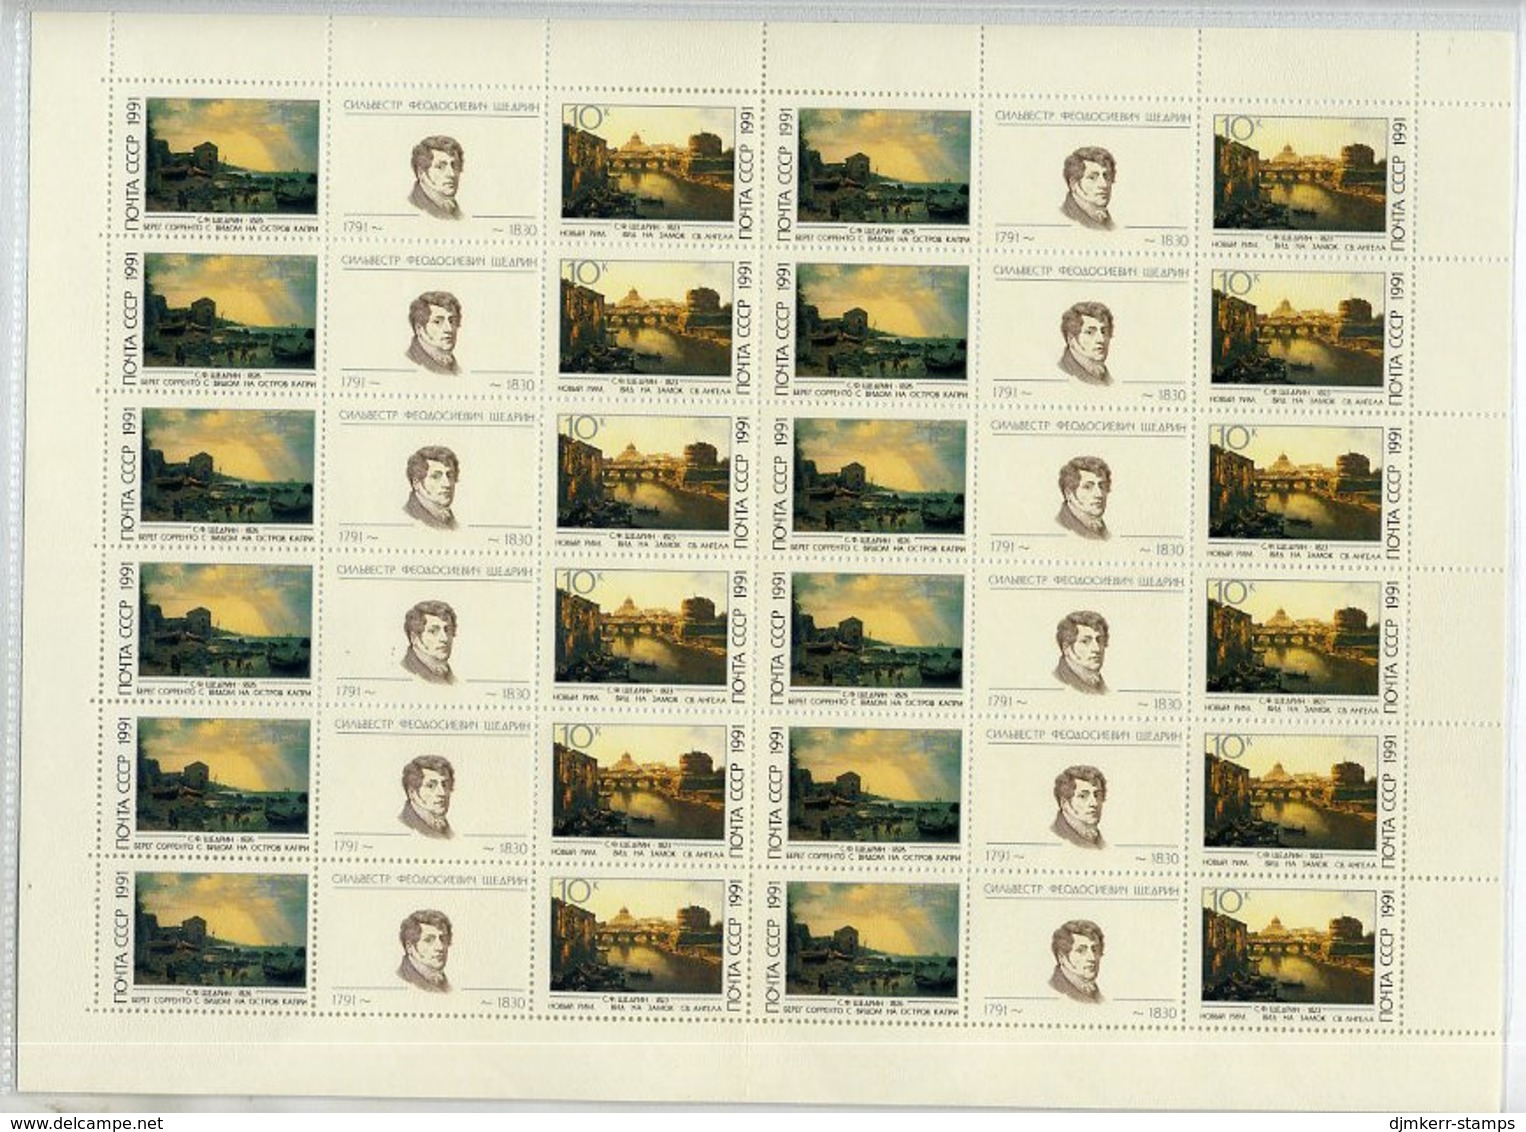 SOVIET UNION 1991 Artists' Anniversaries Complete Sheets With 12 Sets MNH / **. Michel 6465-68 - Full Sheets